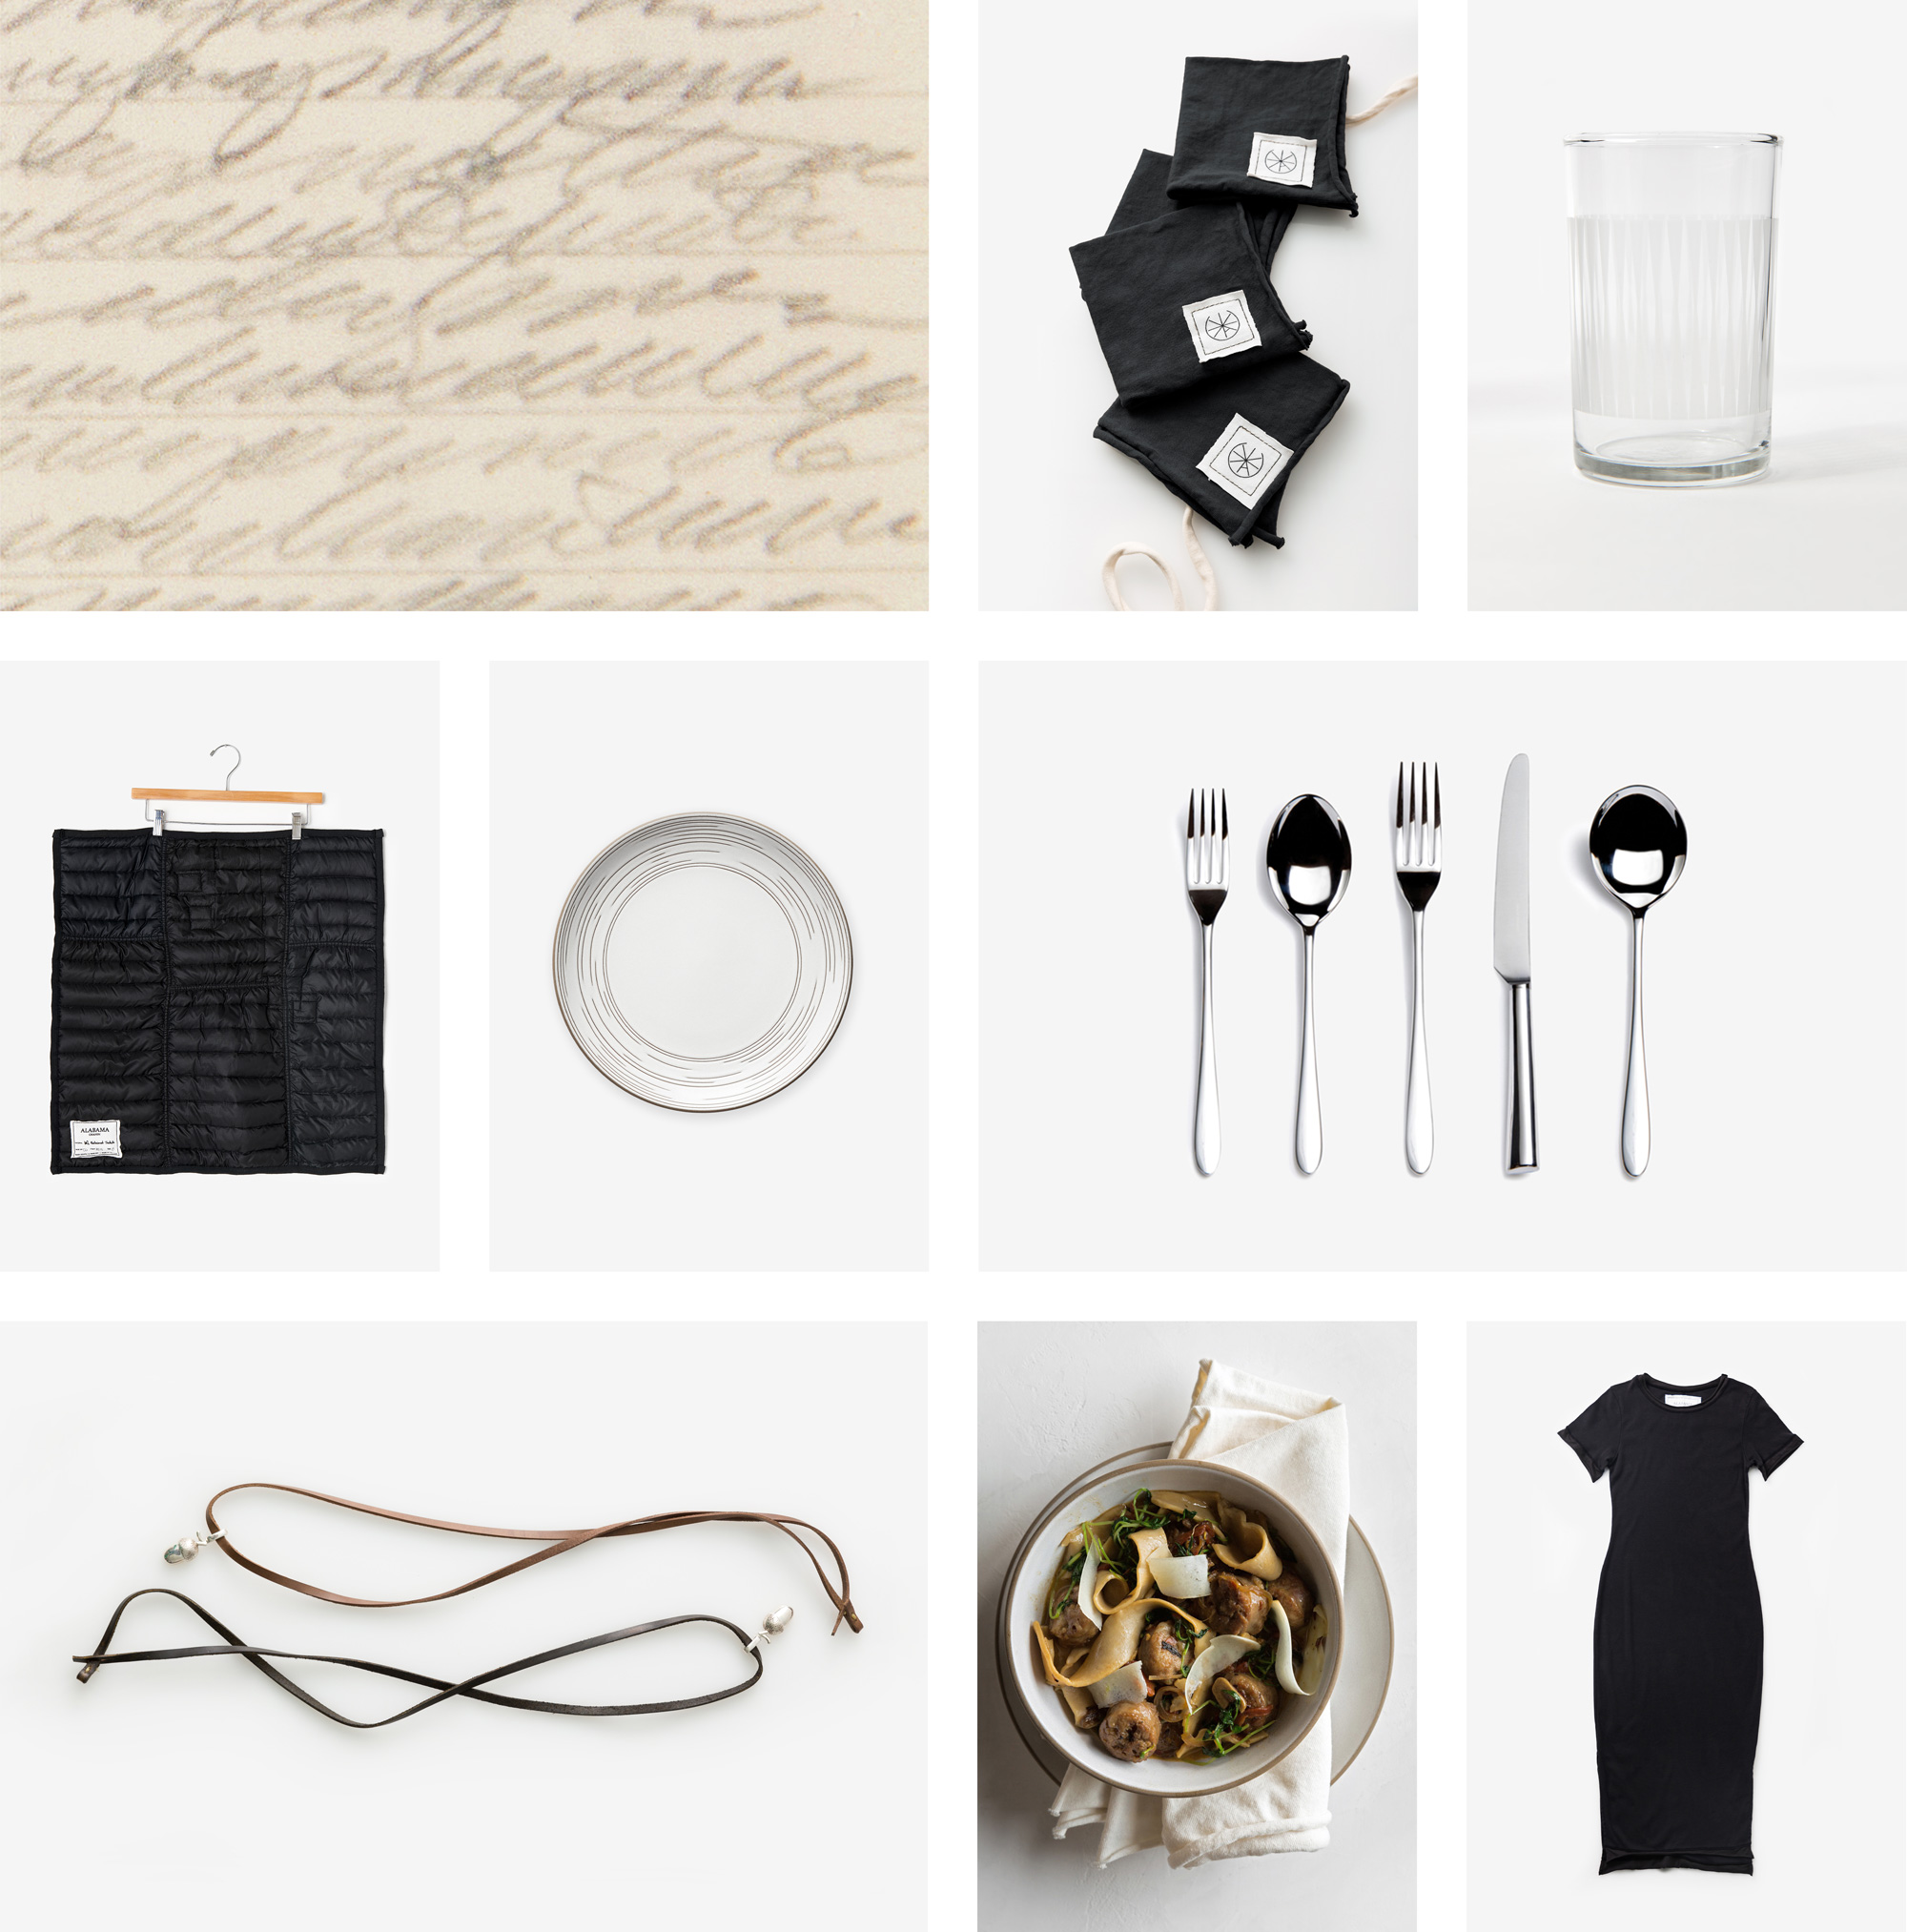 Image grid of holiday gifts for the home and wardrobe from Alabama Chanin